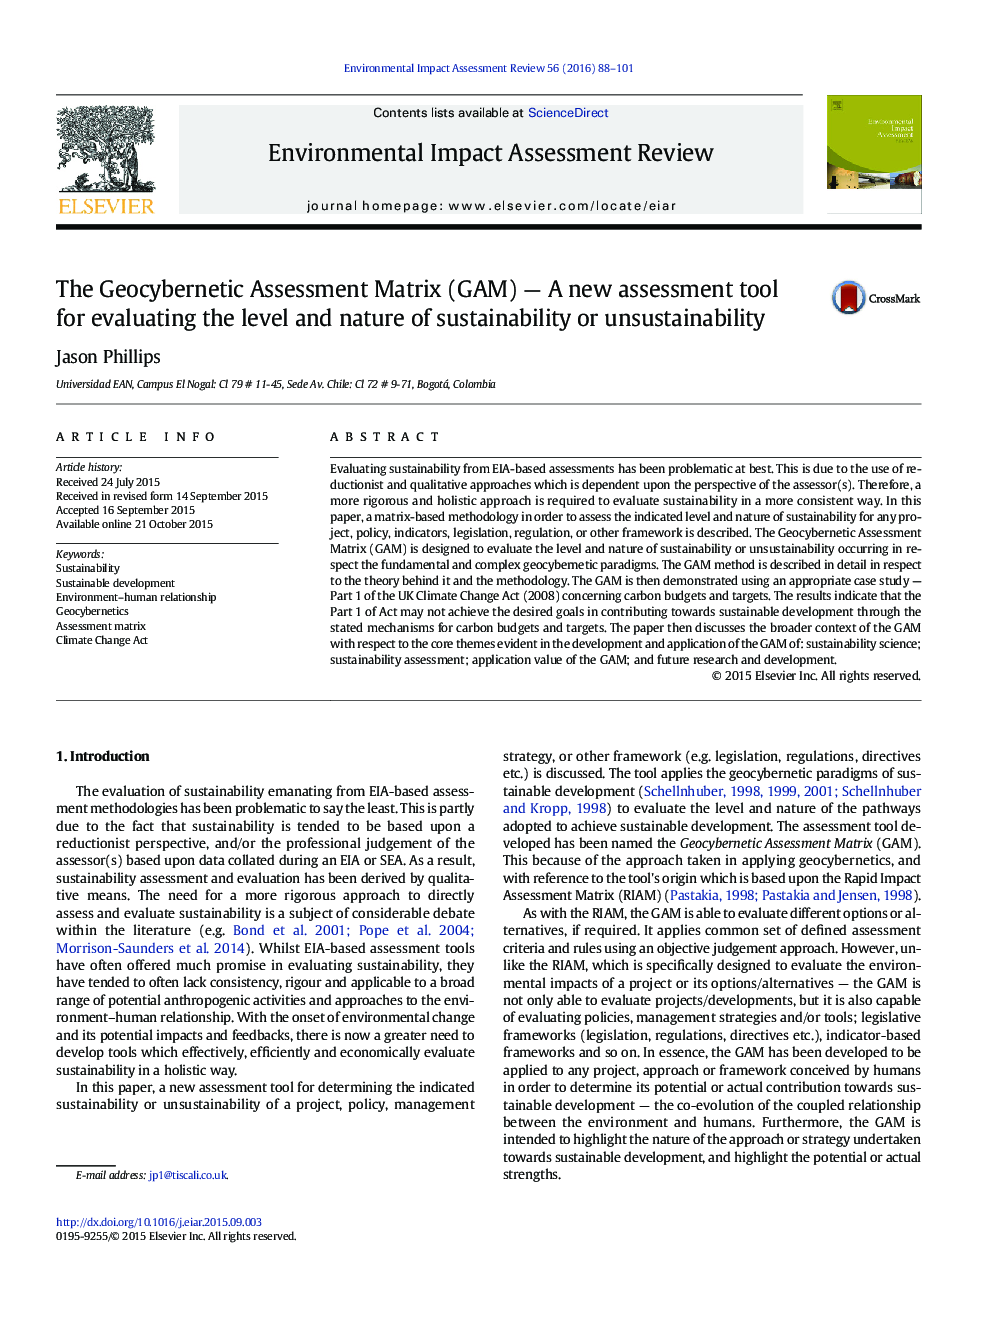 The Geocybernetic Assessment Matrix (GAM) — A new assessment tool for evaluating the level and nature of sustainability or unsustainability